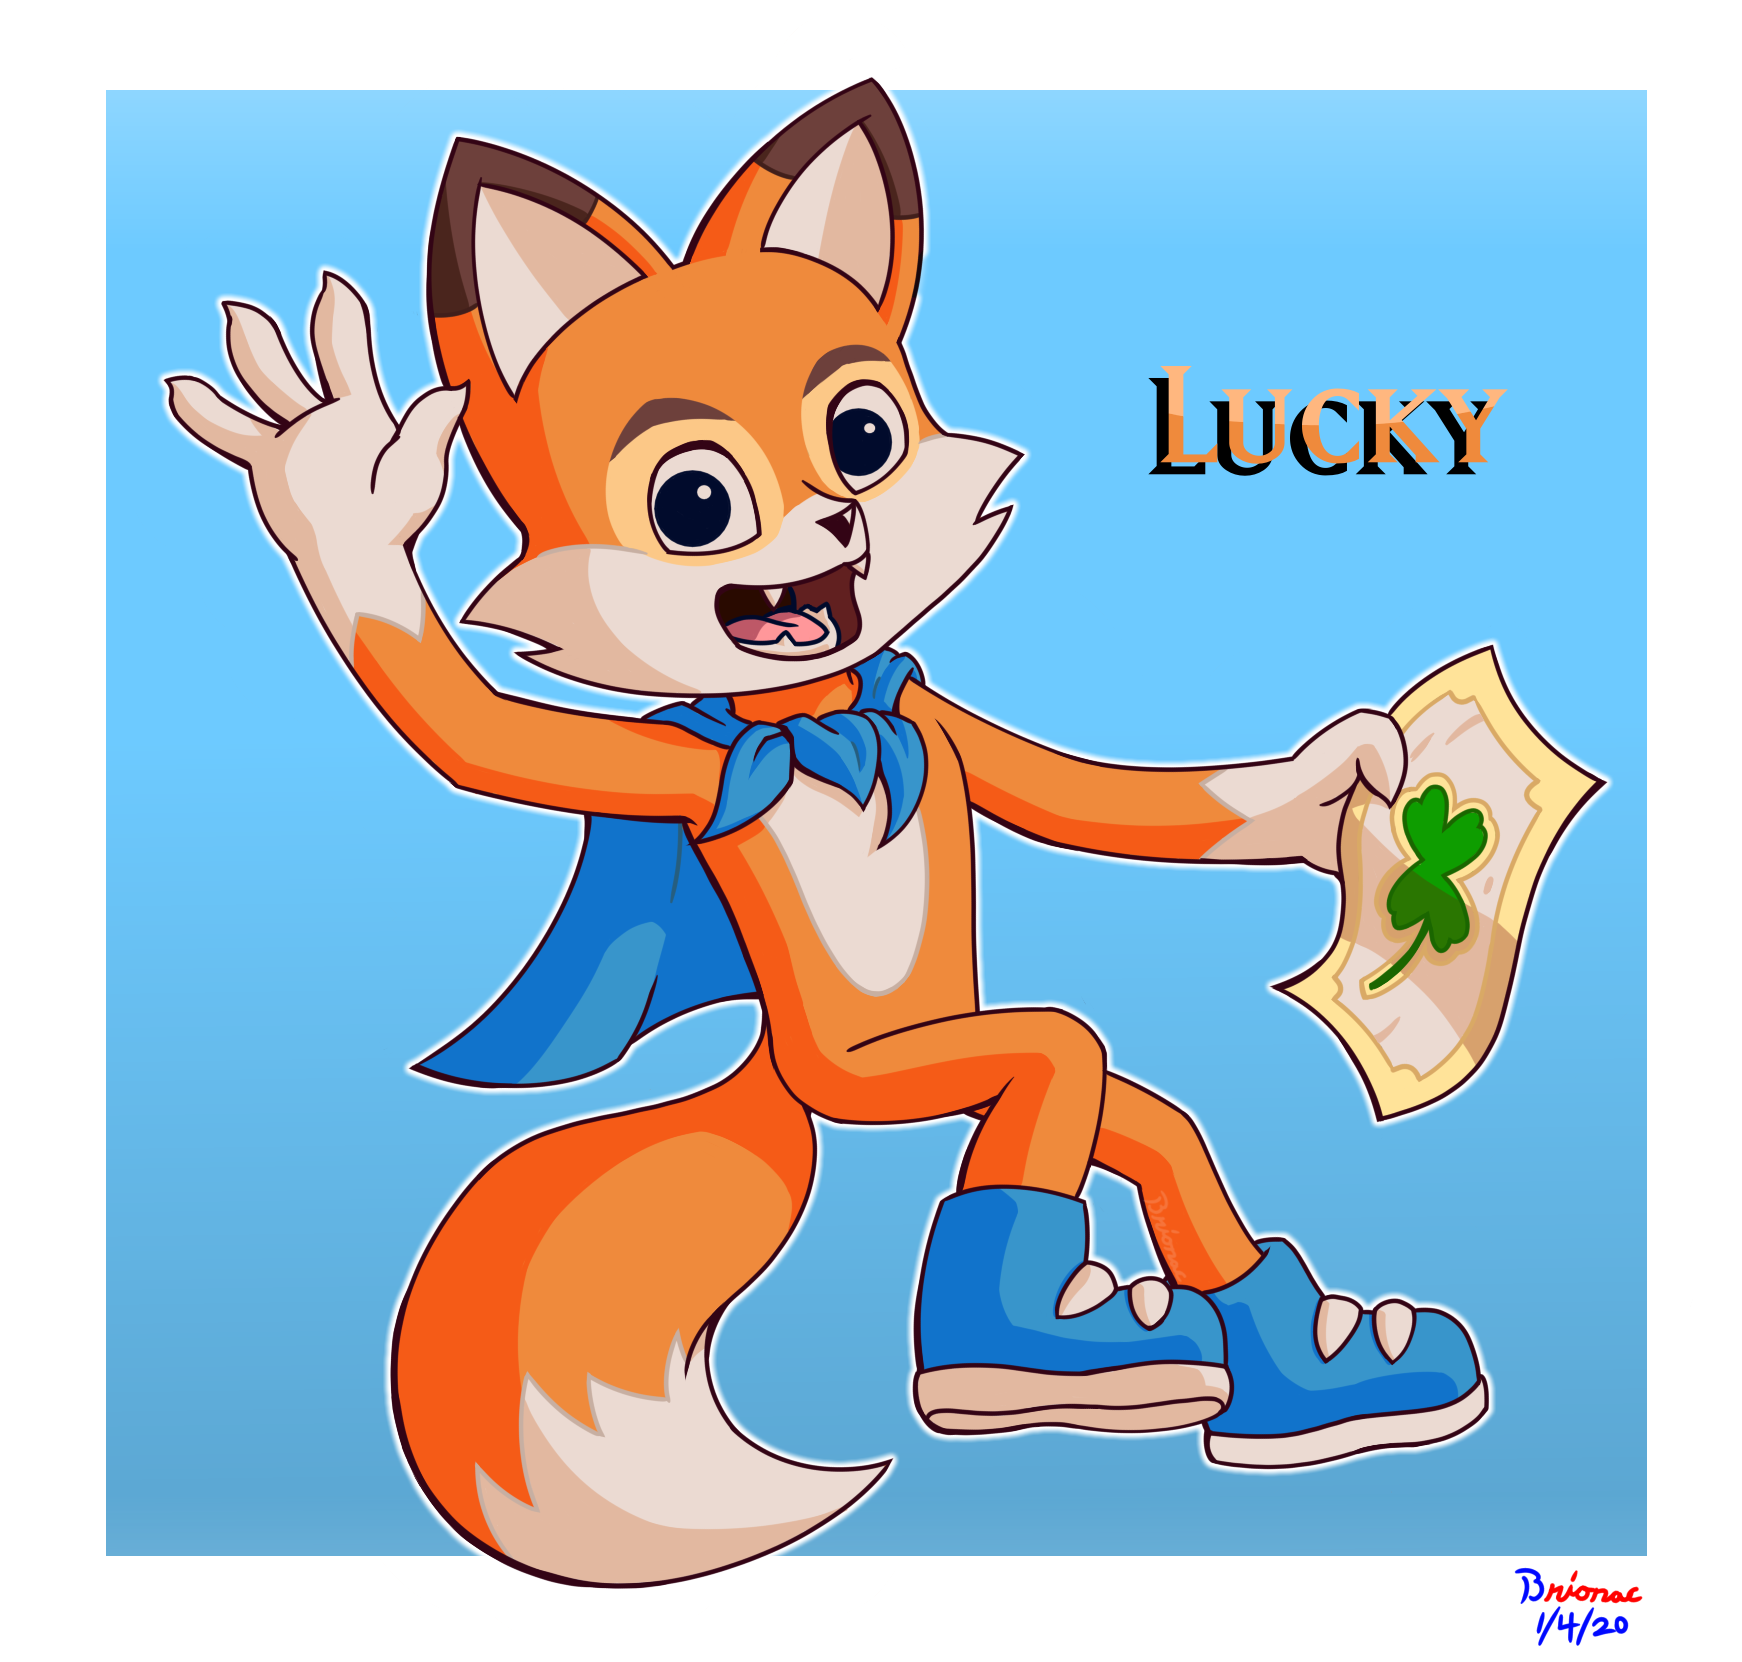 Lucky New Super Lucky S Tale By Brionac777 On Deviantart